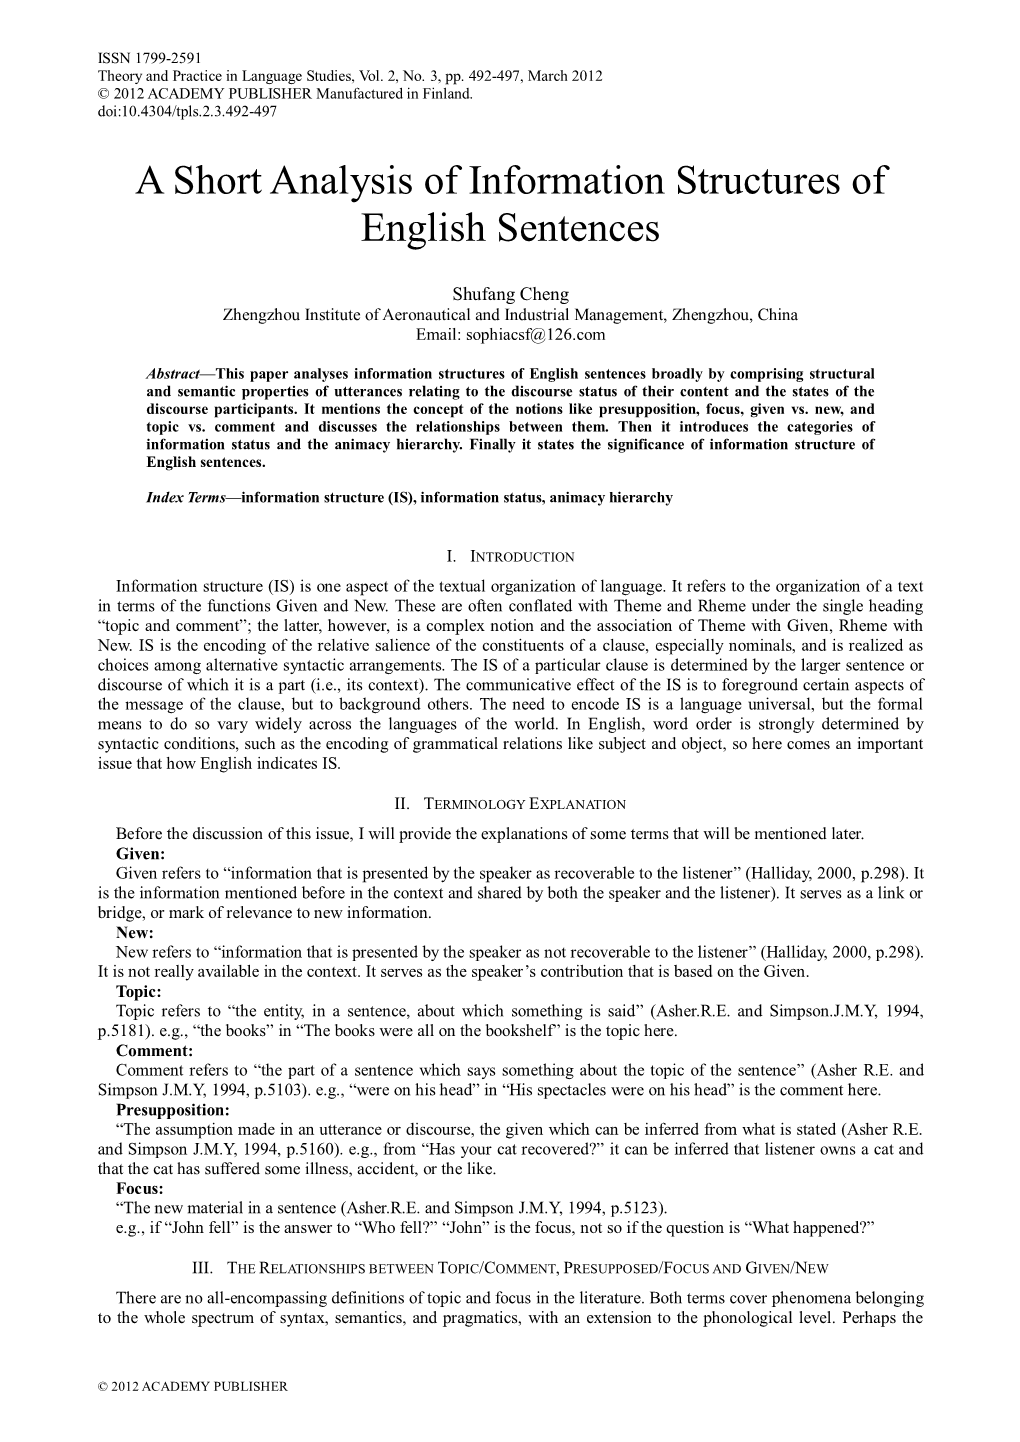 A Short Analysis of Information Structures of English Sentences